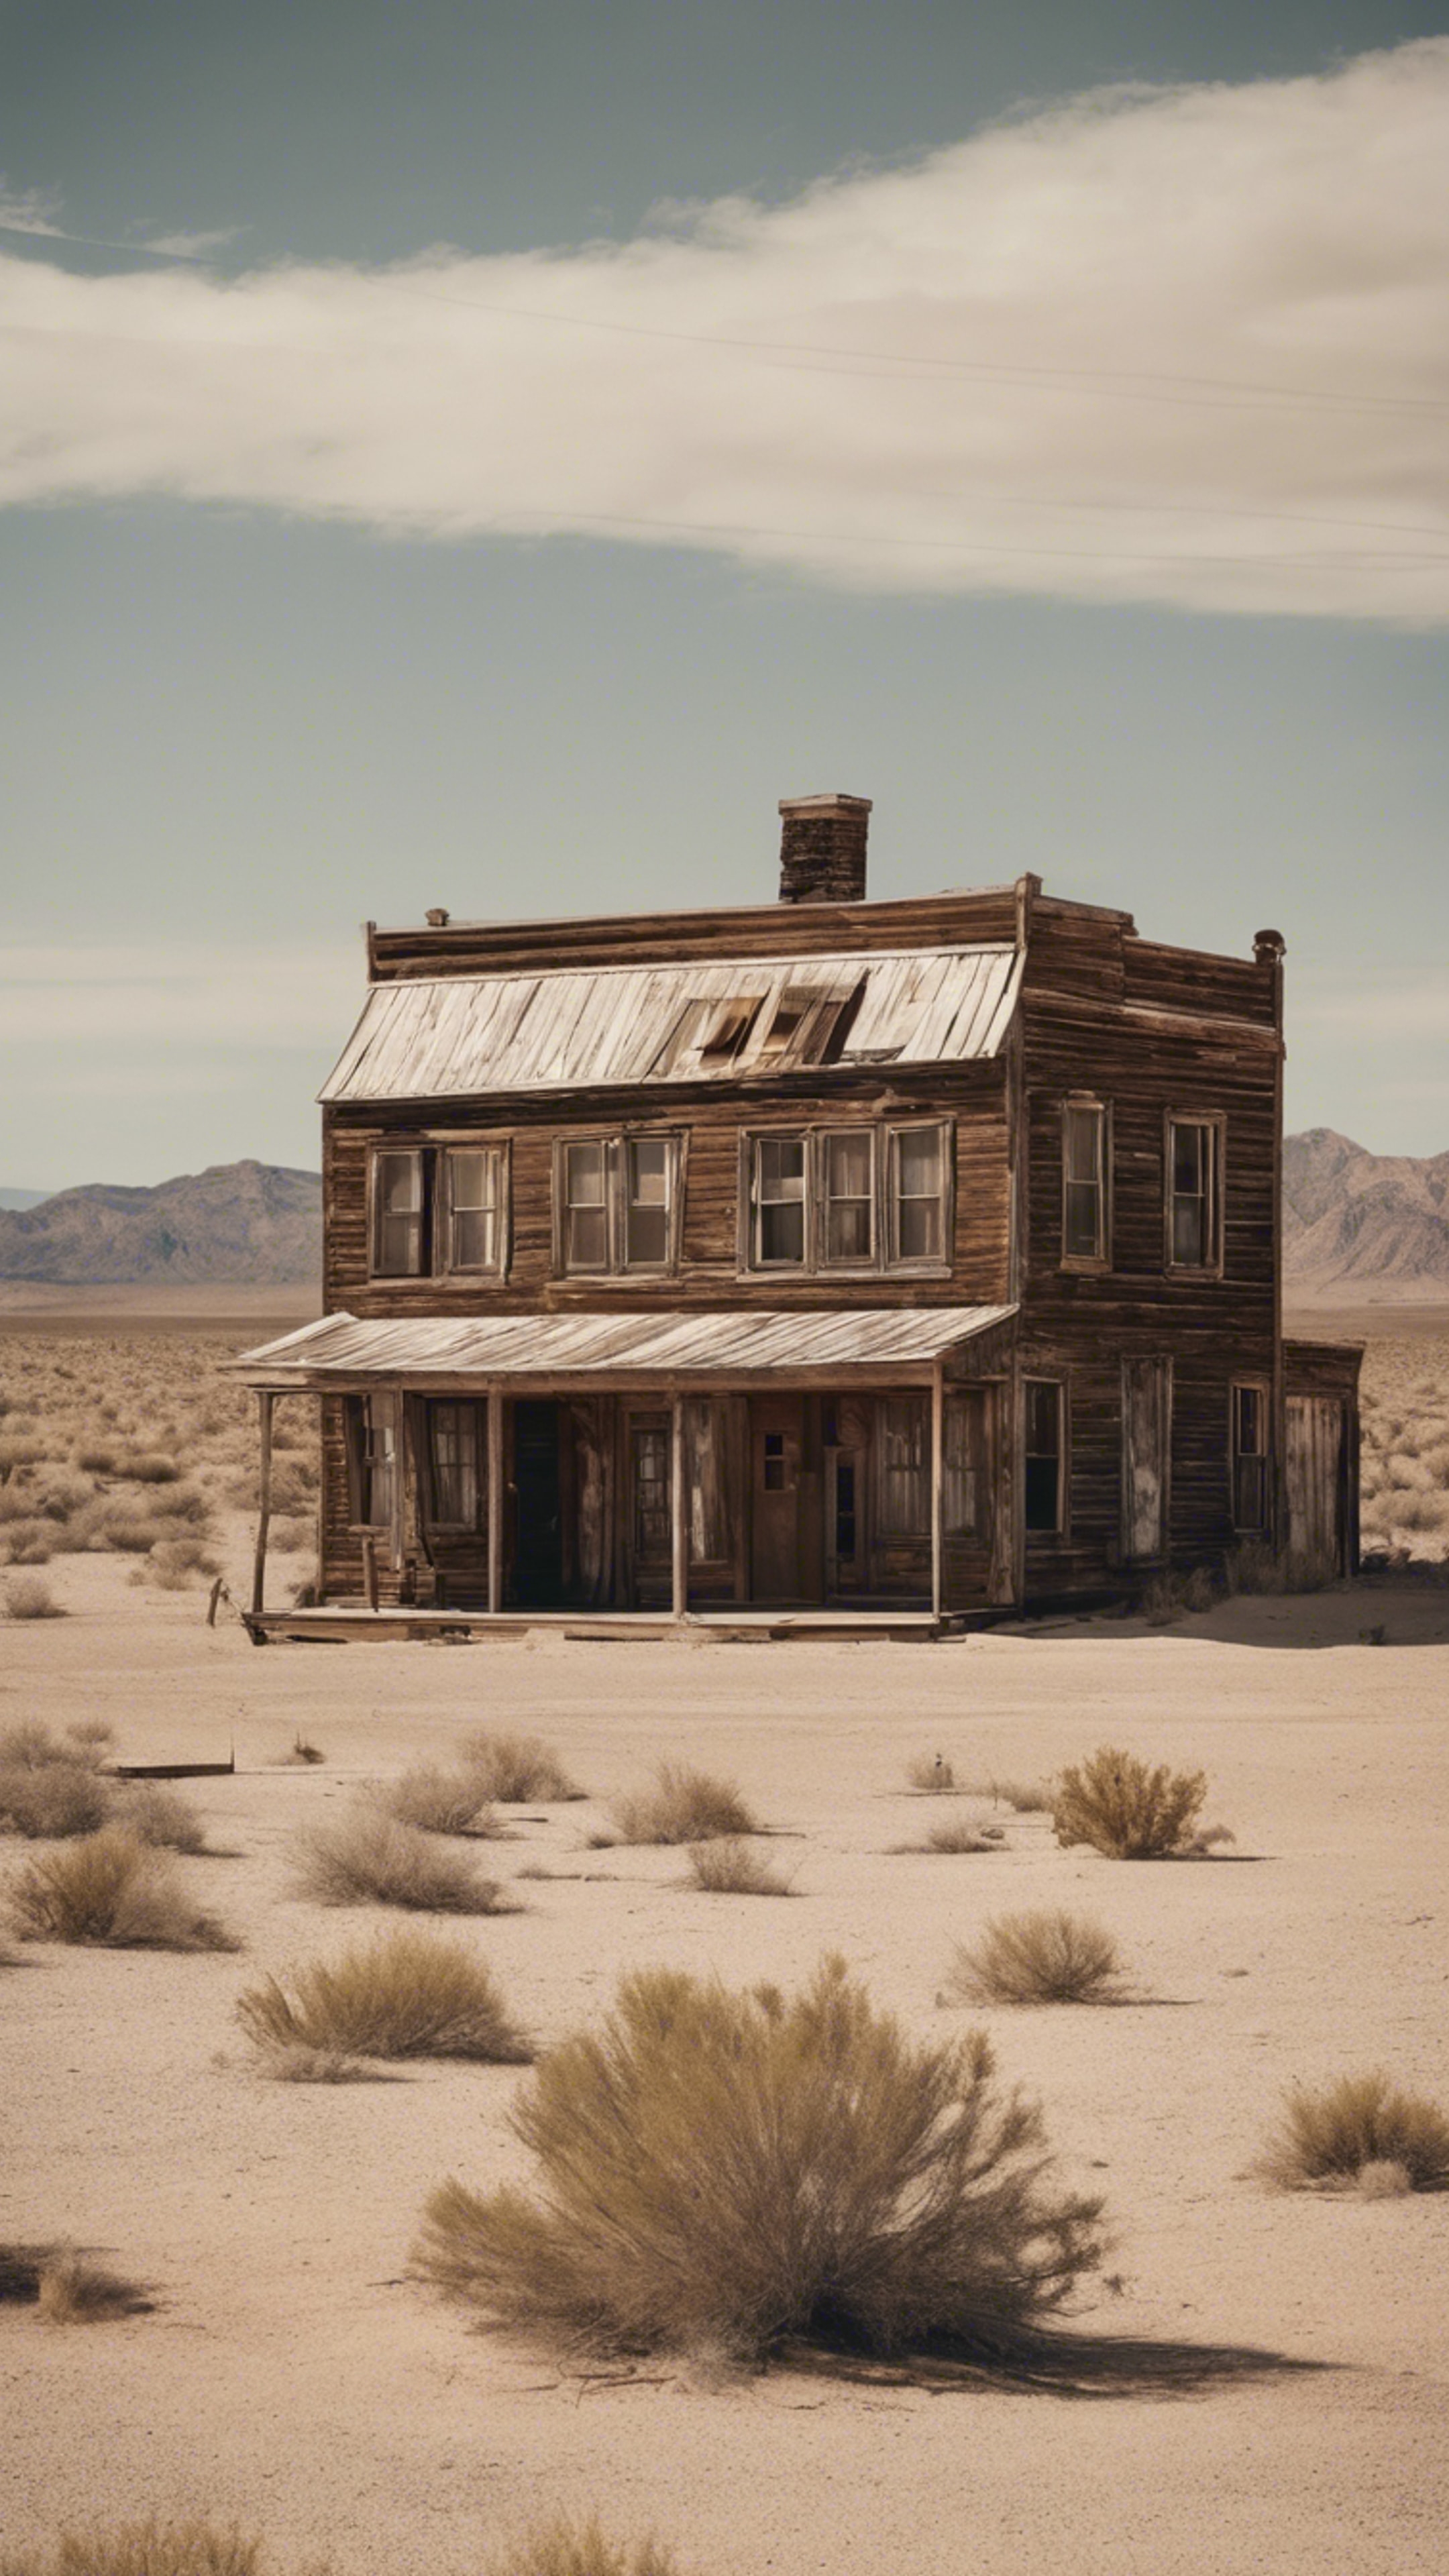 An old western ghost town located in the heart of an inhospitable sandy desert.壁紙[5d1c1c6d4731481194e6]